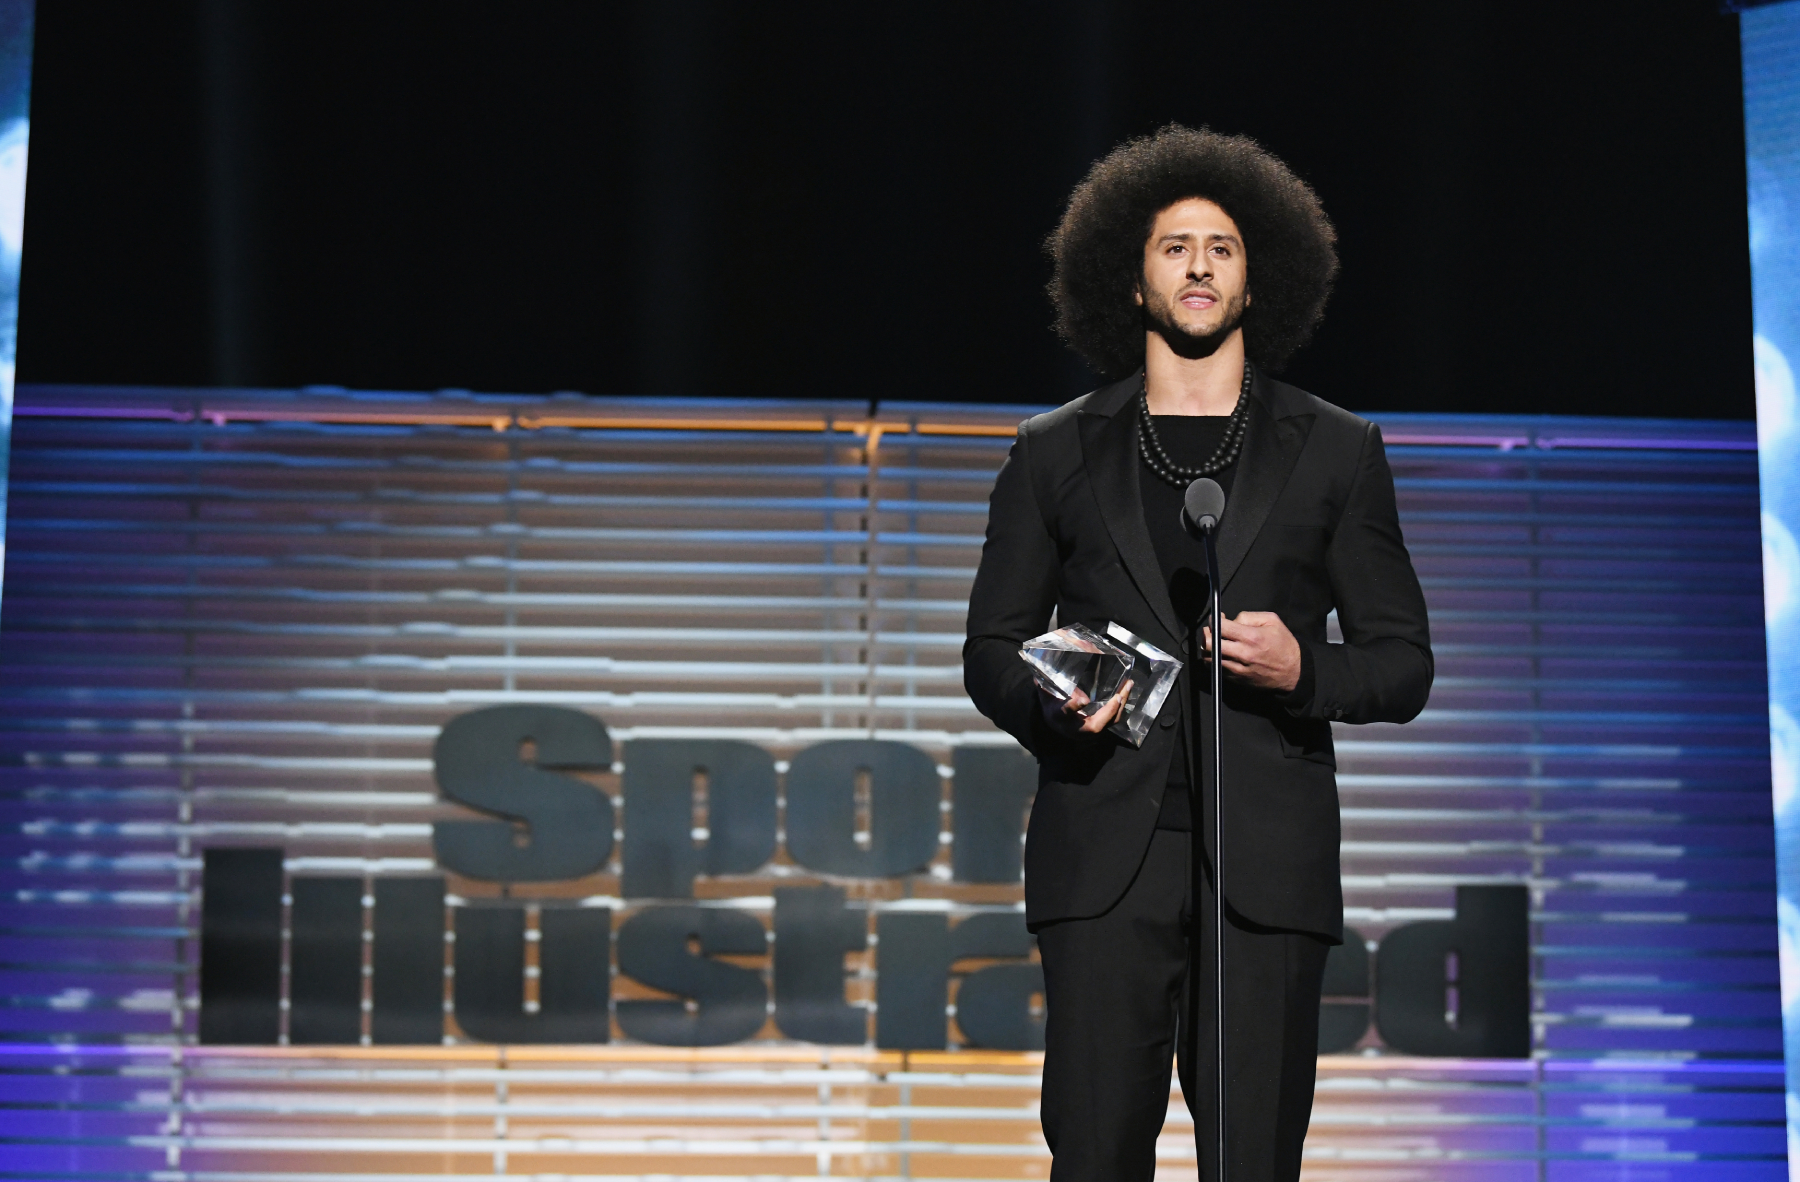 Former 49ers QB Colin Kaepernick has called for police to be abolished in the past. Now, he is sending his strongest message yet.